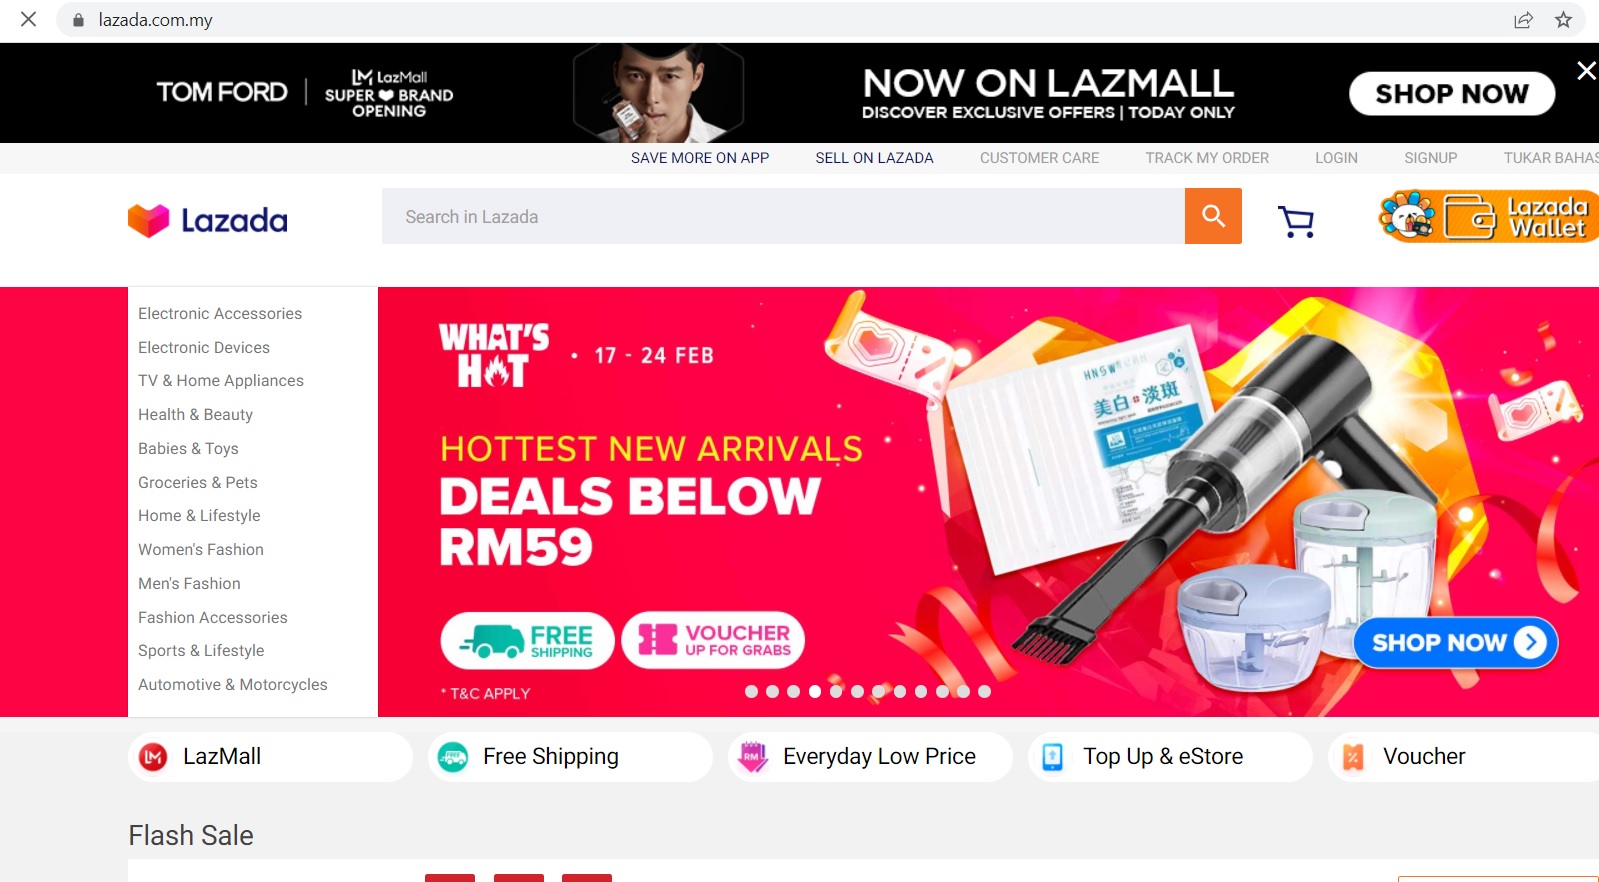 lazada official website to apply coupon codes